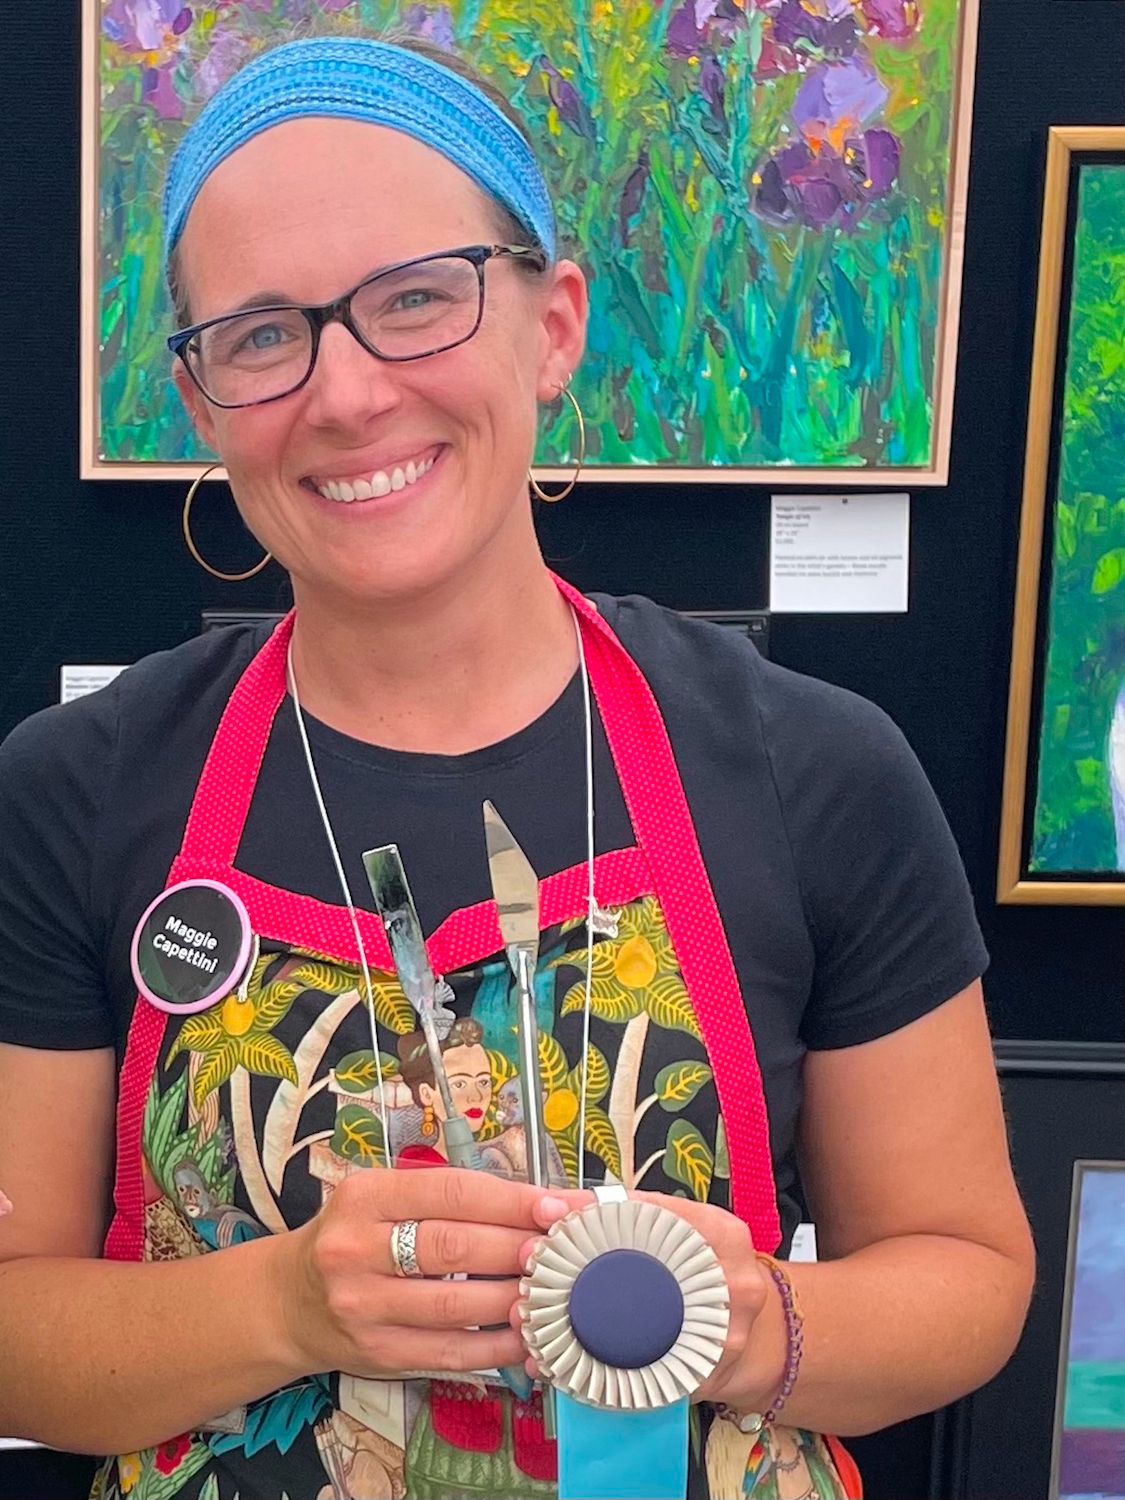 The artist and her knives, awarded Outstanding Achievement in Painting at Wheaton Art Walk, 2022. Photo credit Amdur Productions